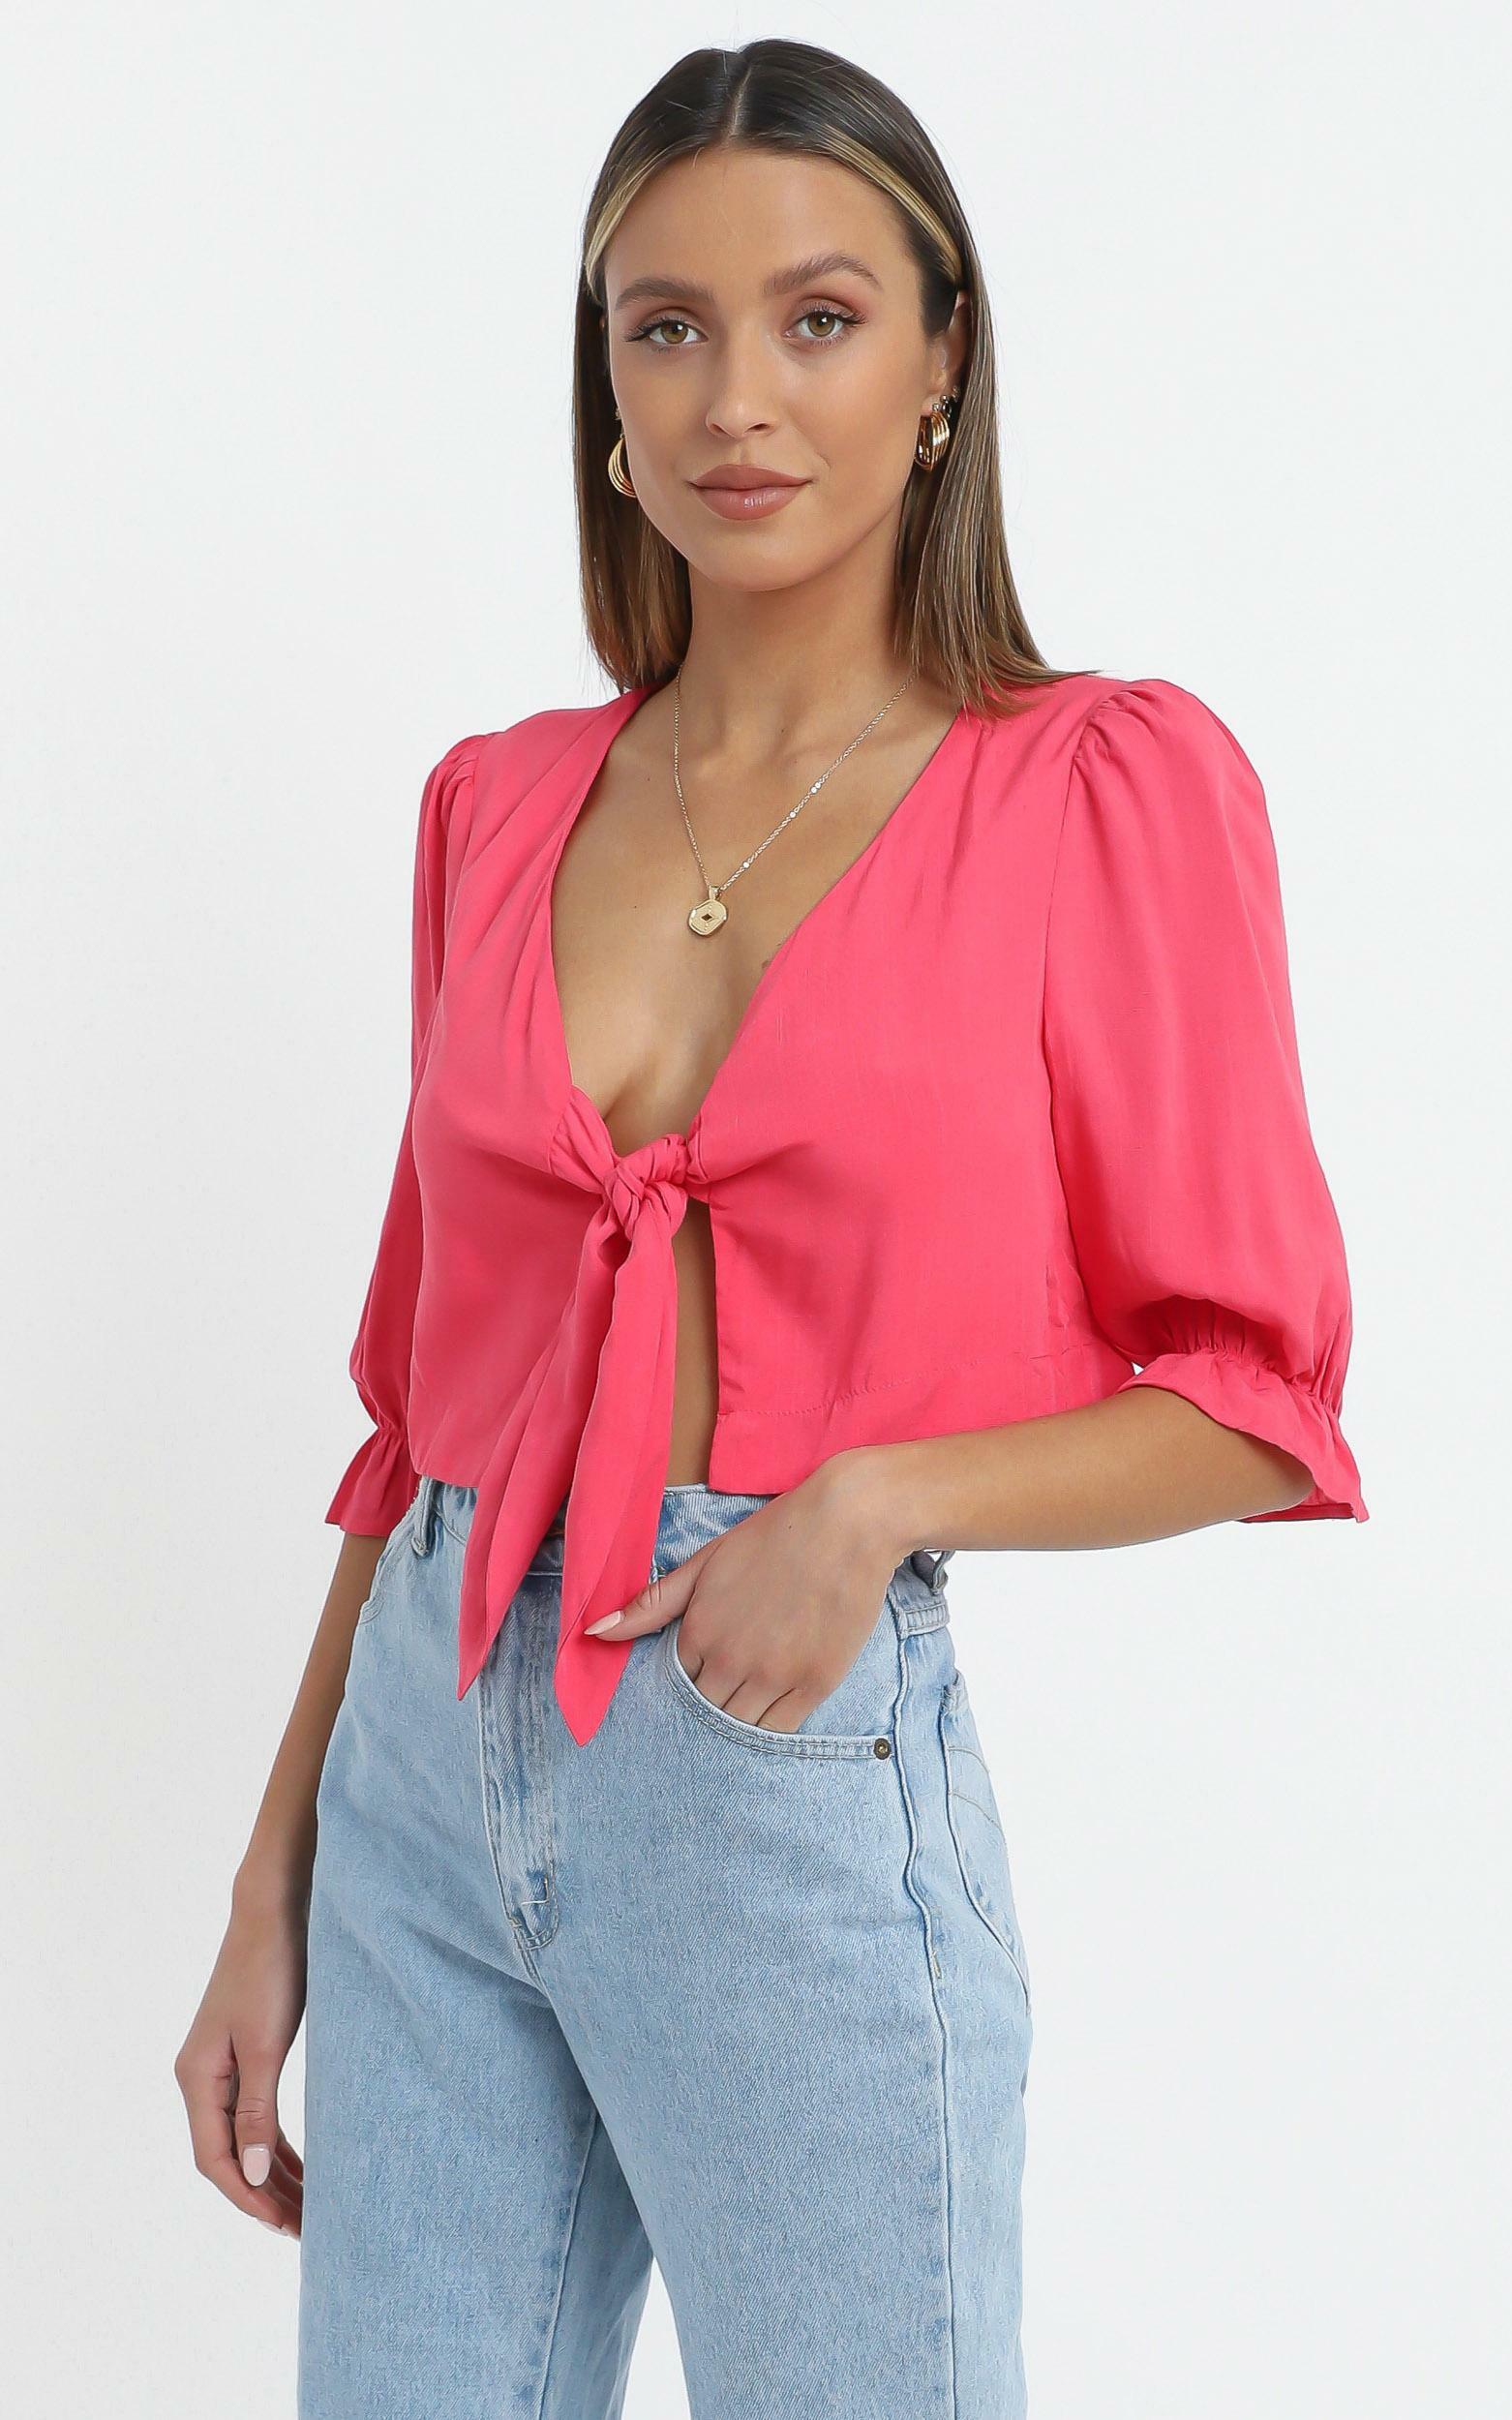 Kailani Top in Hot Pink - 14 (XL), Pink, hi-res image number null